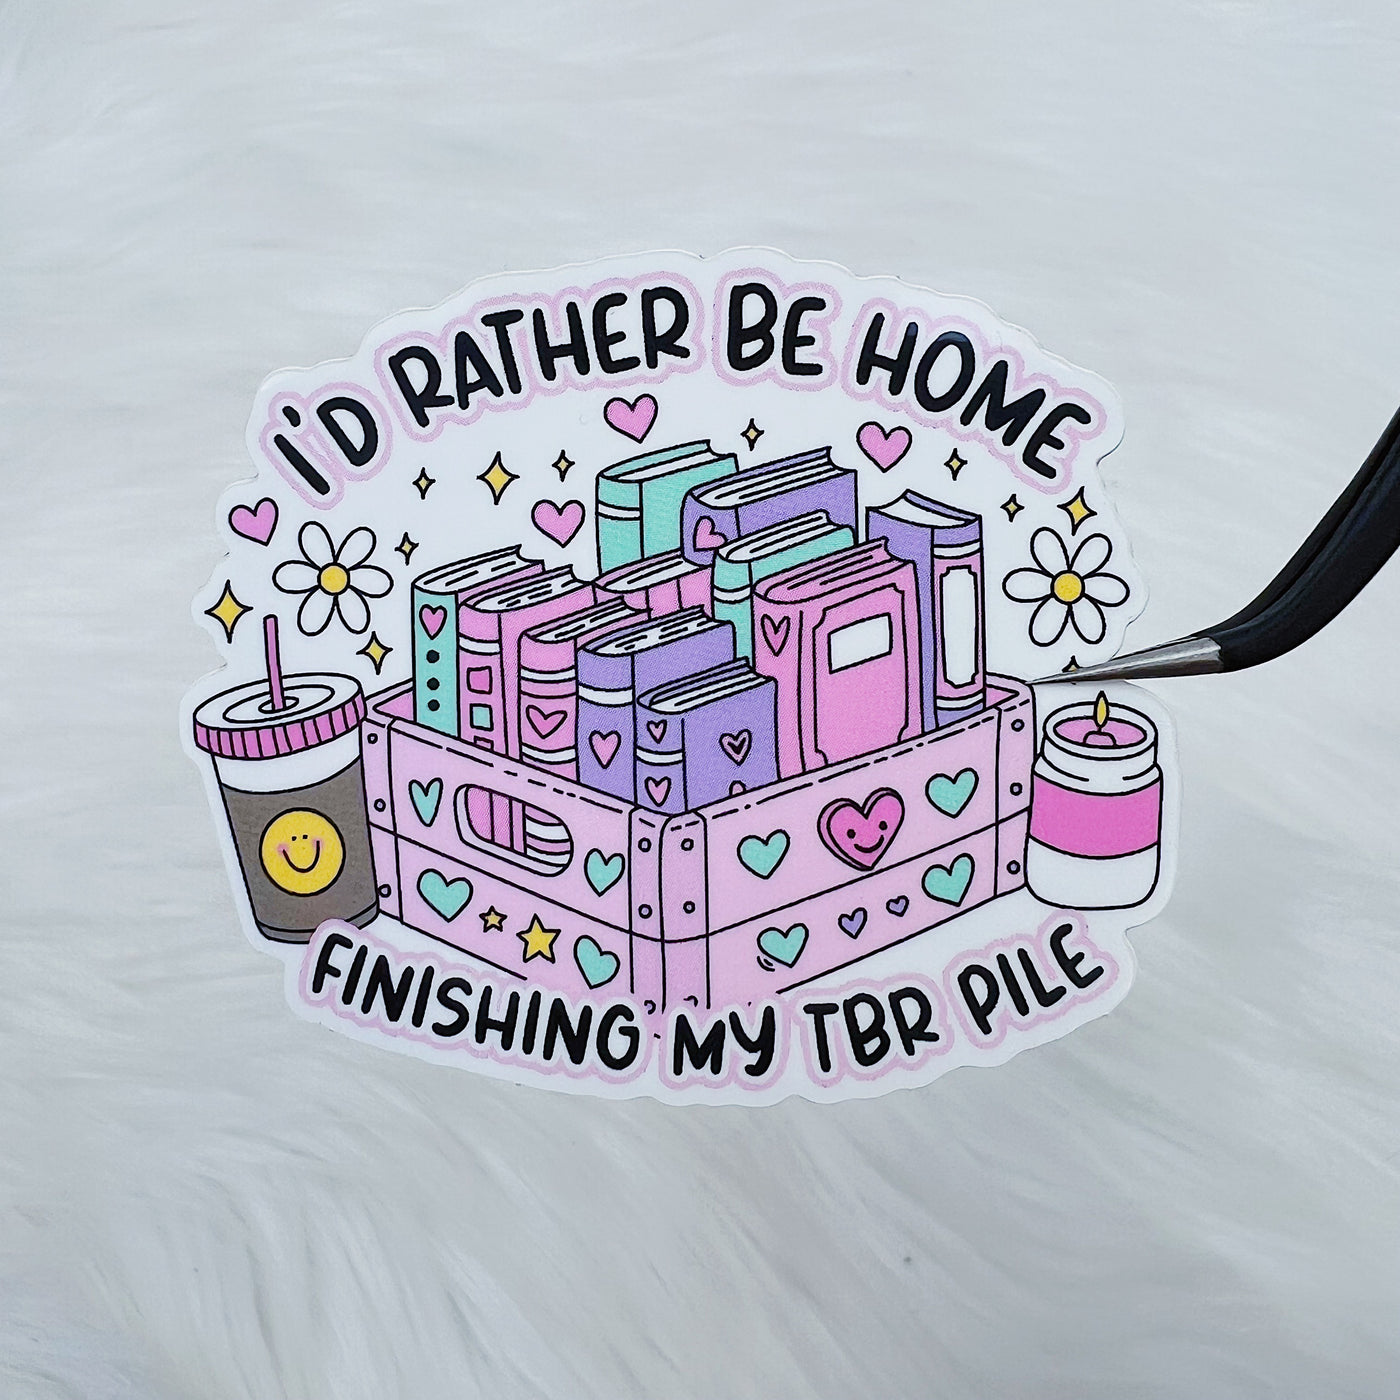 I'd Rather Be at Home Finishing My TBR Pile Vinyl Sticker Die Cut